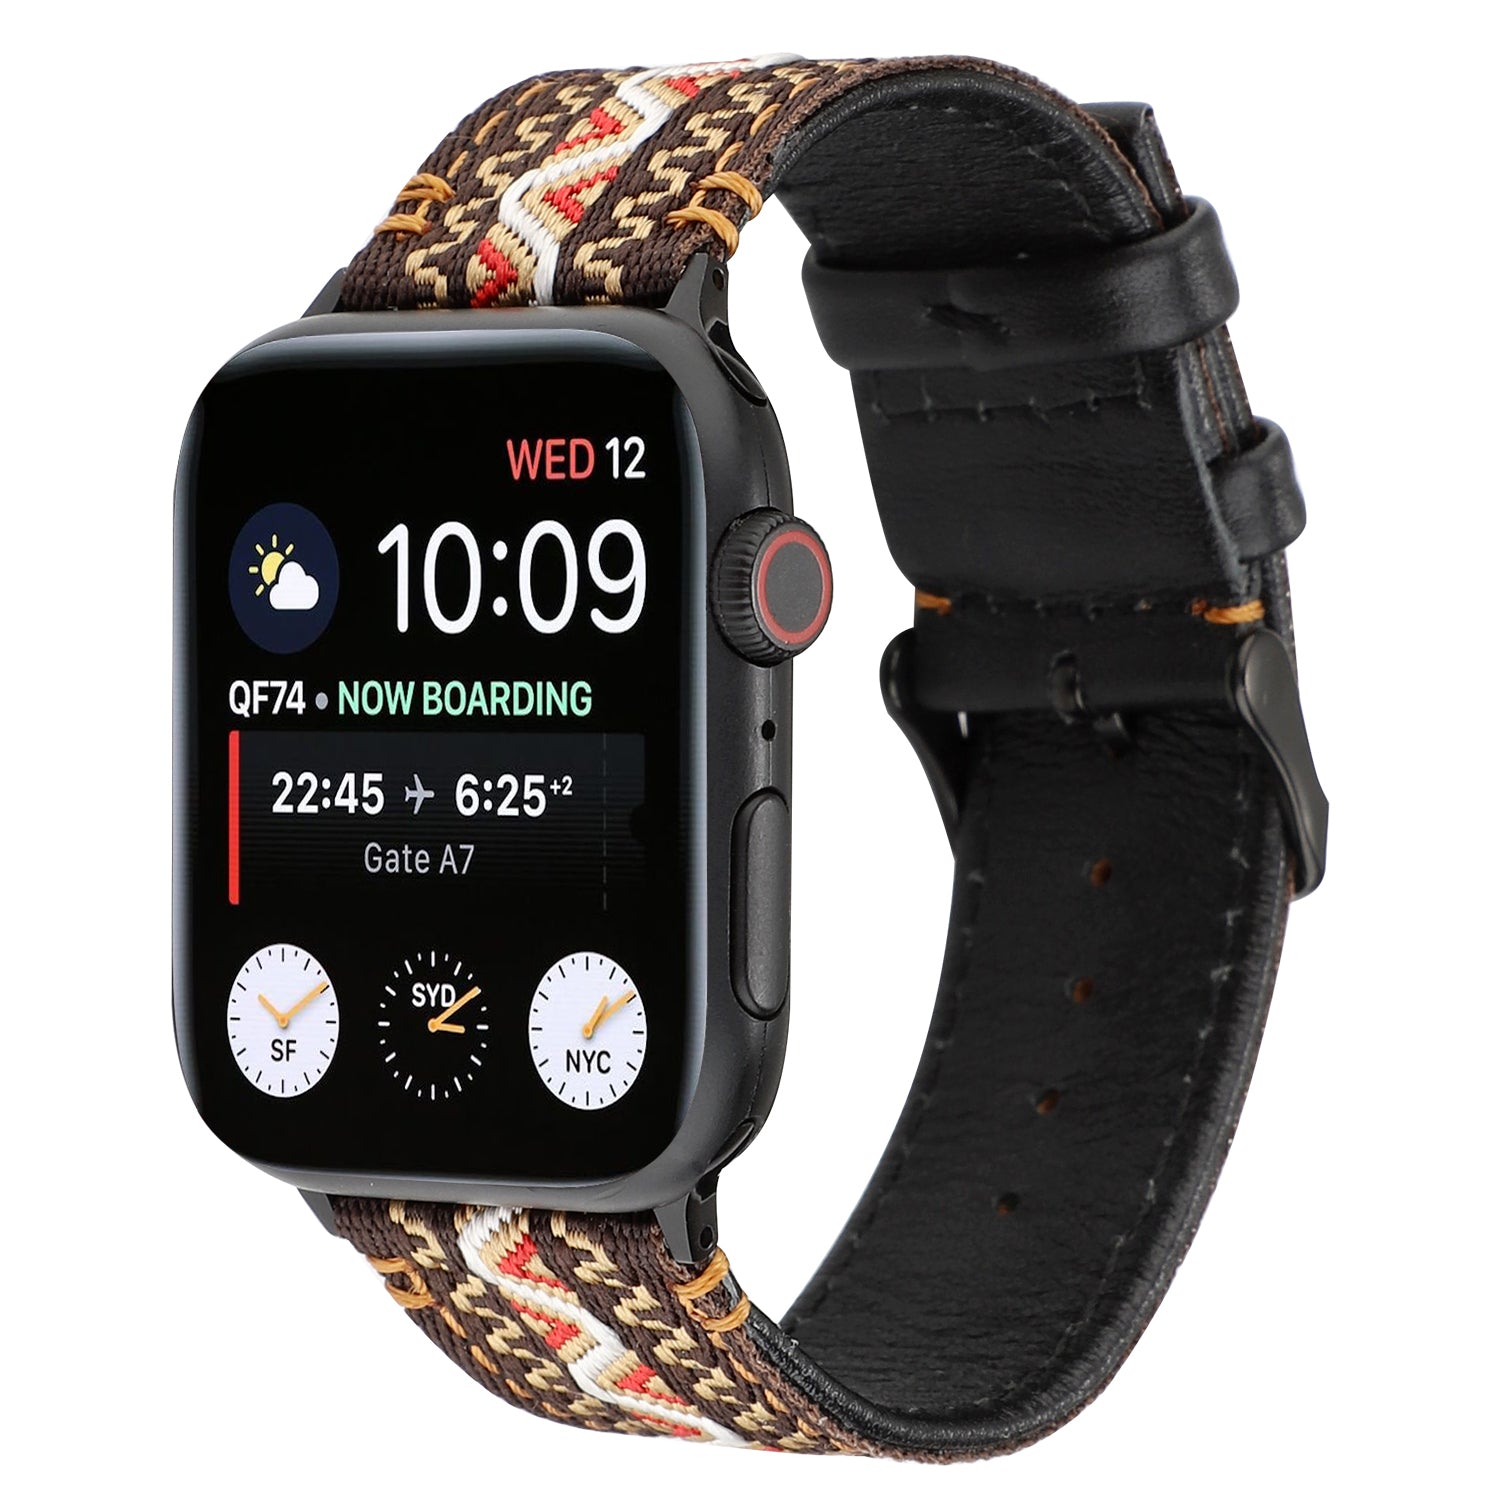 Boho-DreamWeave Leather Fancy Multiple For Band Bands Watch – Apple Available Colors